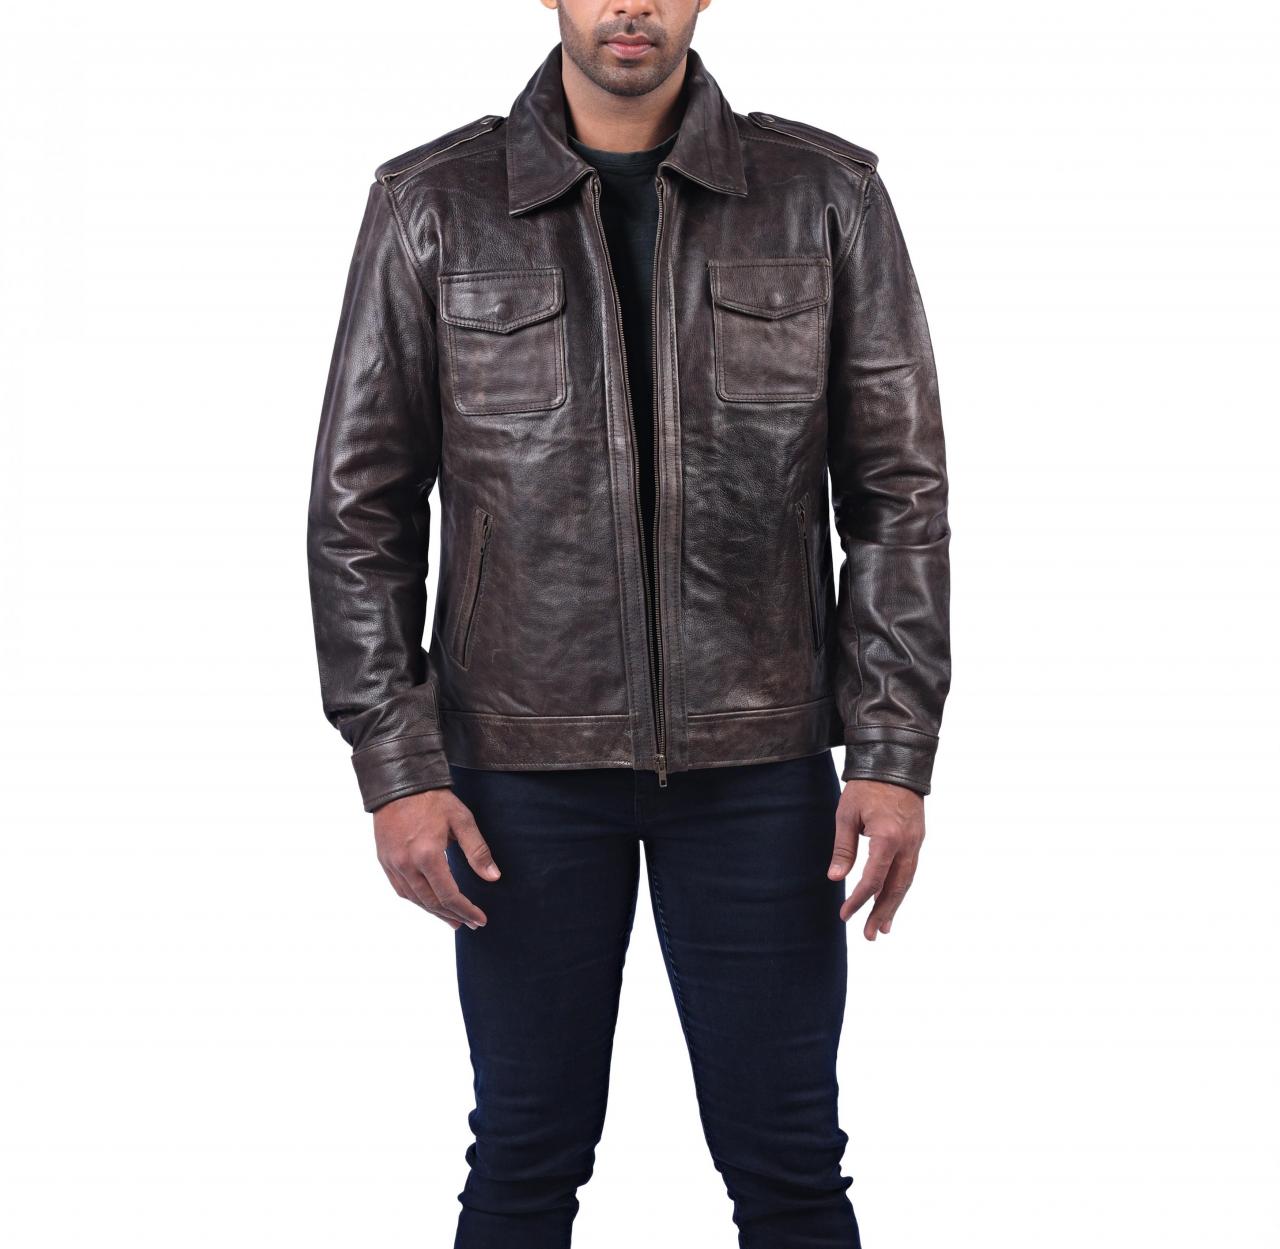 Motorbike Jackets Retro Look Bomber Quilted Brown Leather Motorcycle Jacket